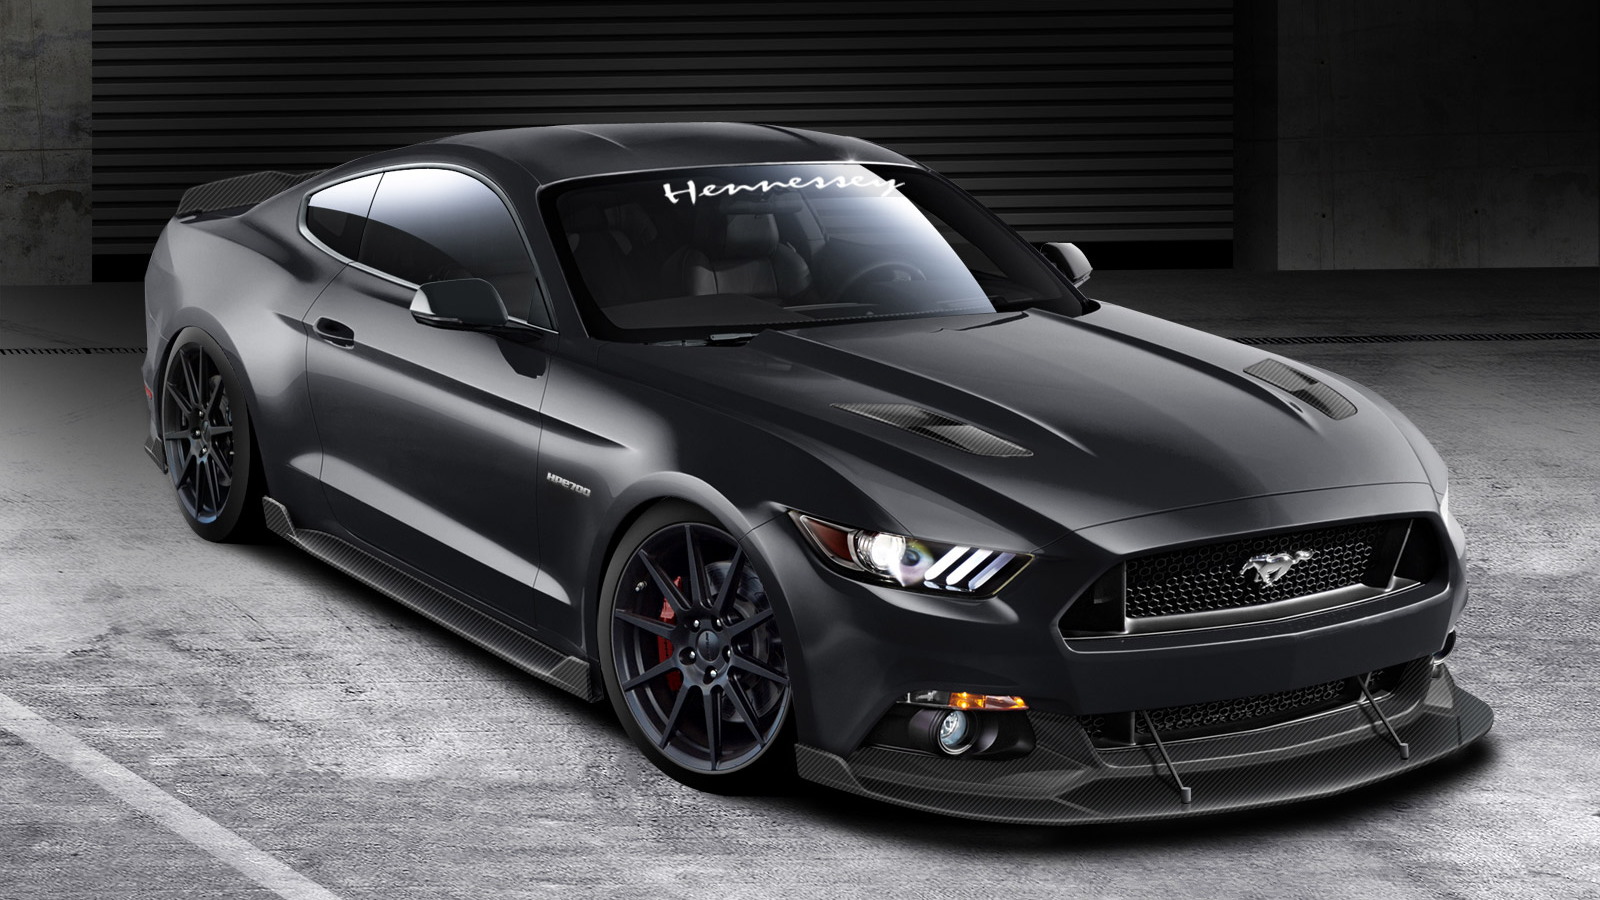 2015 Ford Mustang GT with Hennessey HPE700 package